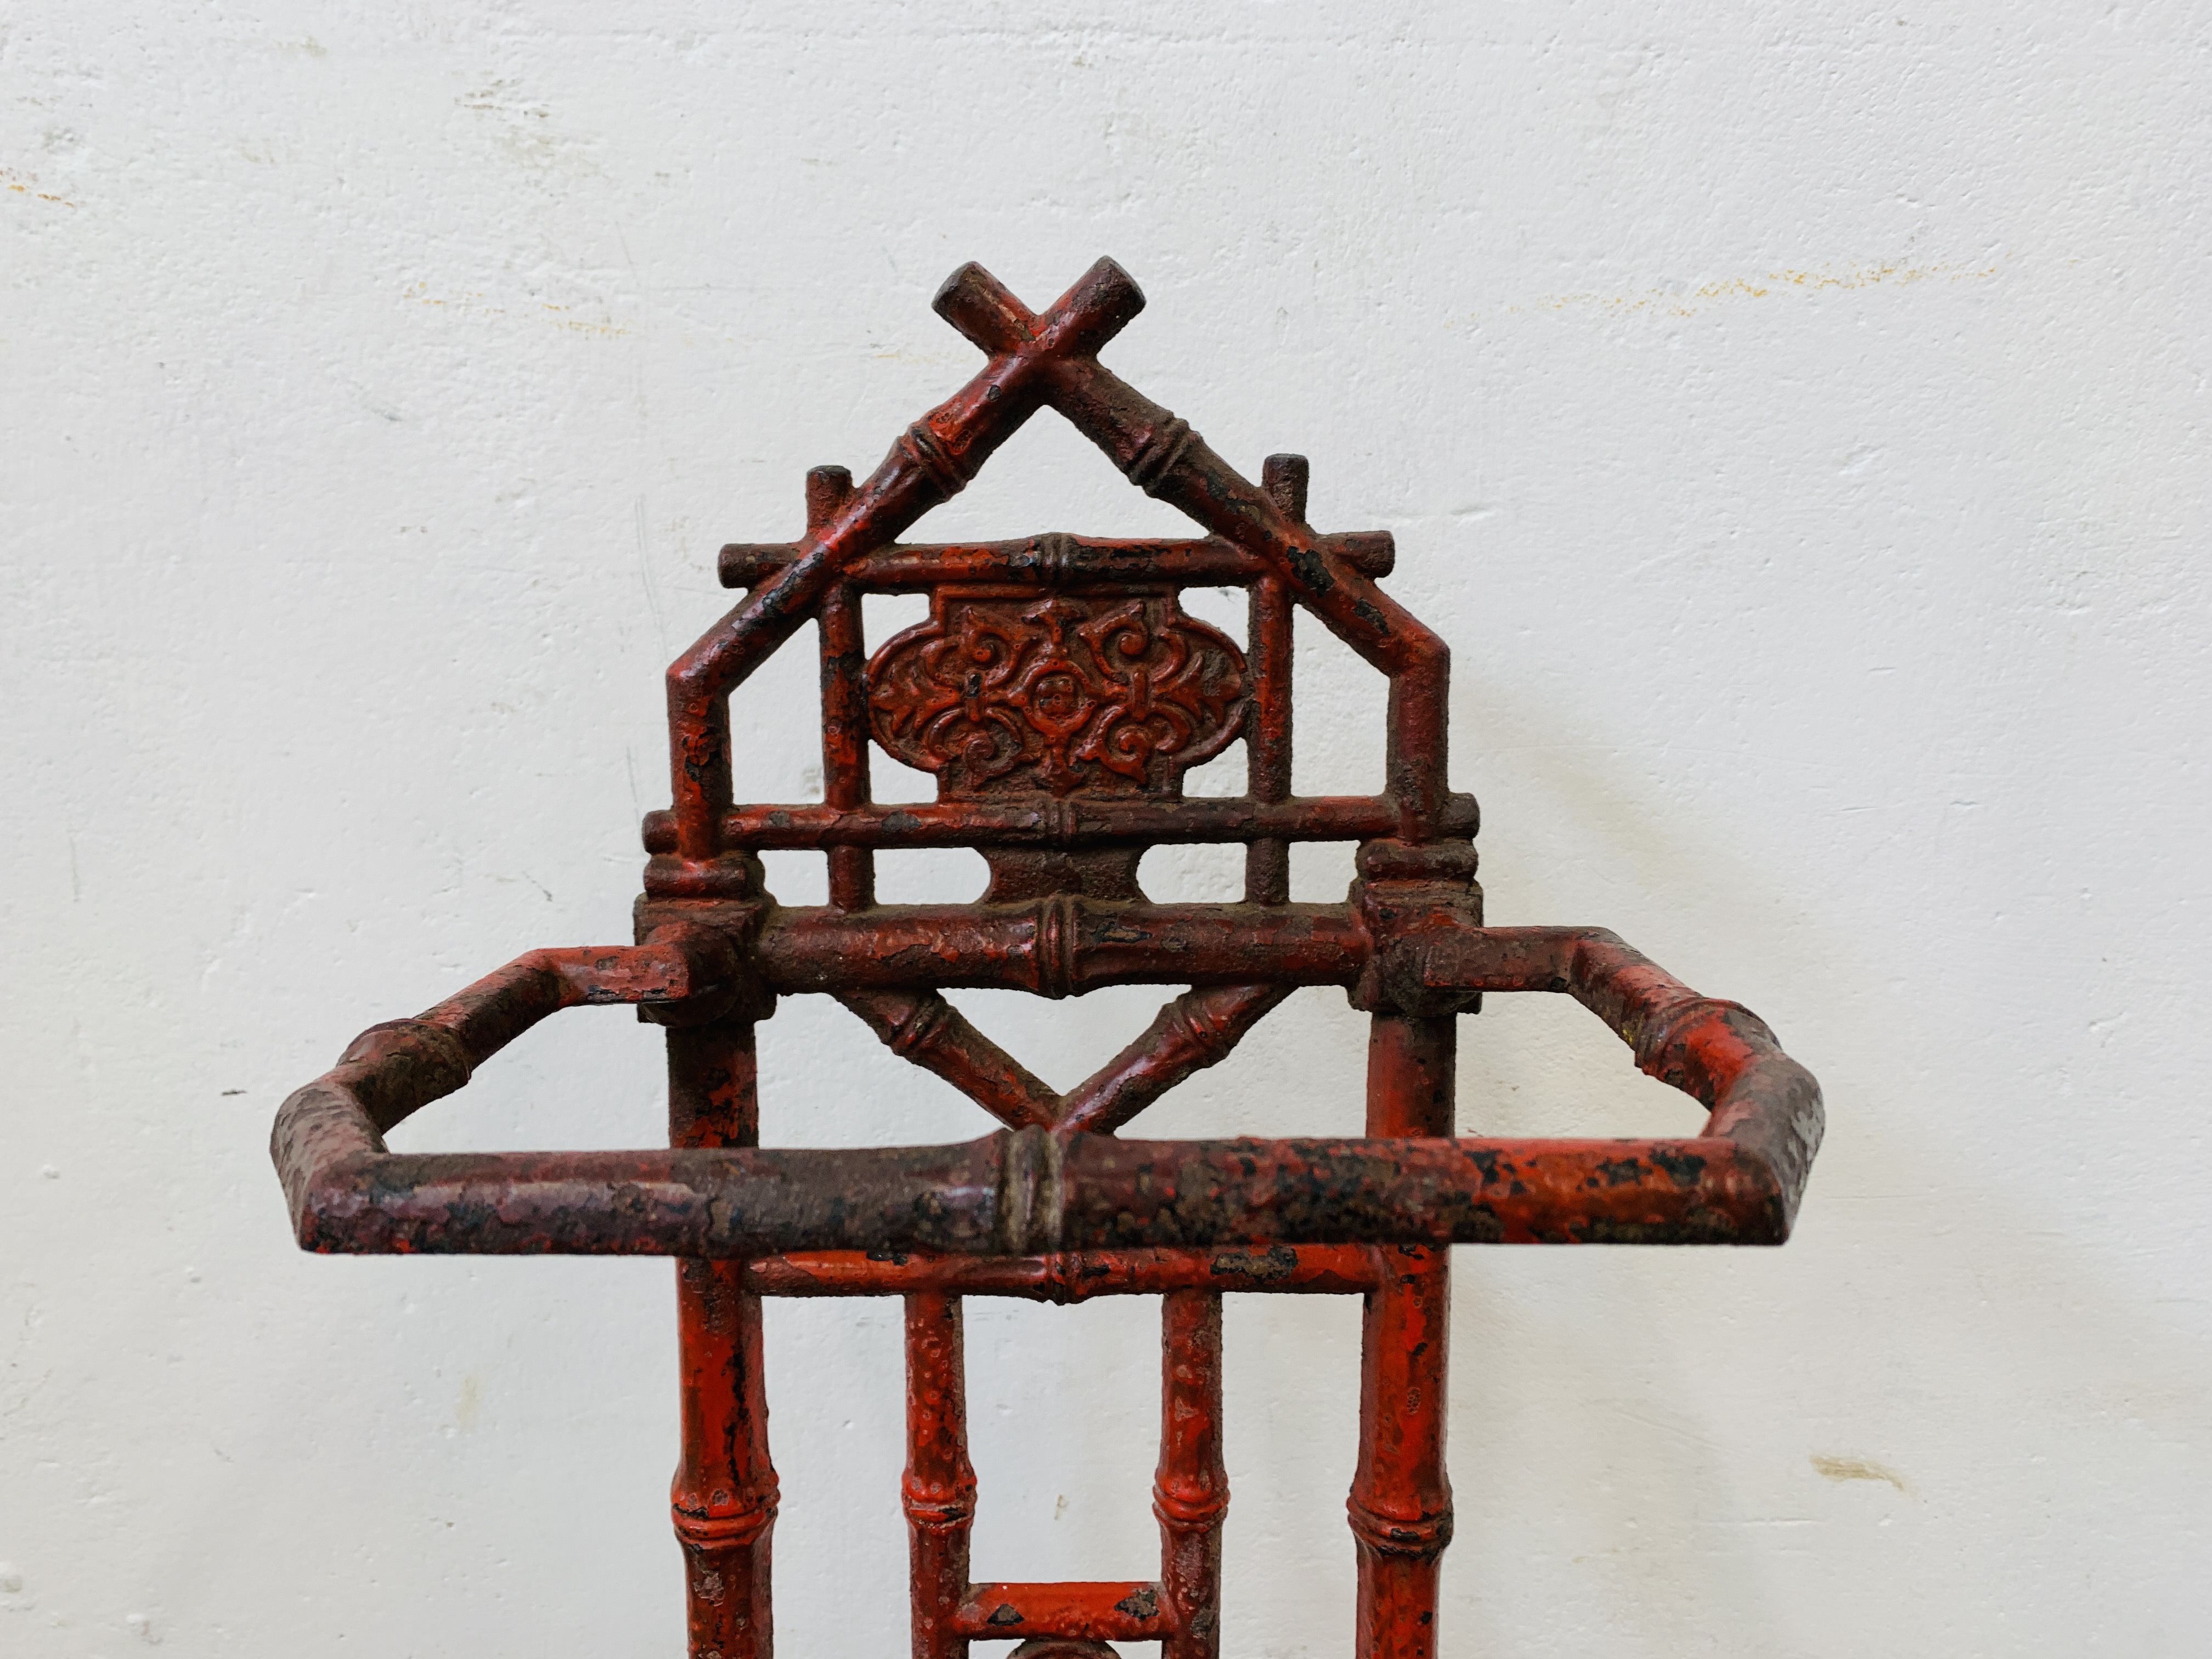 ANTIQUE CAST IRON UMBRELLA STAND - BAMBOO DESIGN (FLAKED RED PAINT) H 70CM. - Image 3 of 6